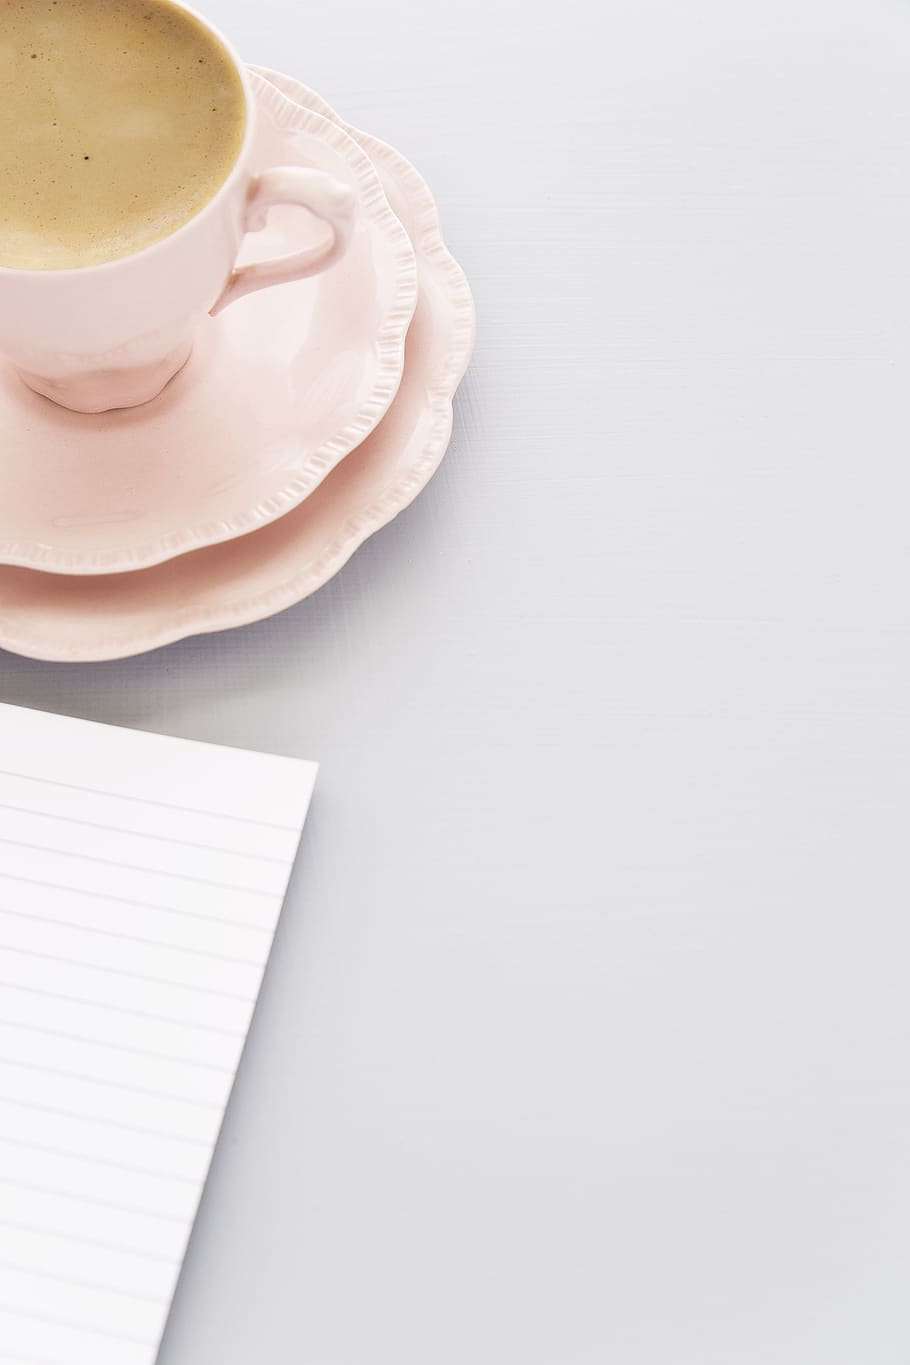 black-lined paper beside pink ceramic cup and saucer, drink, coffee, HD wallpaper